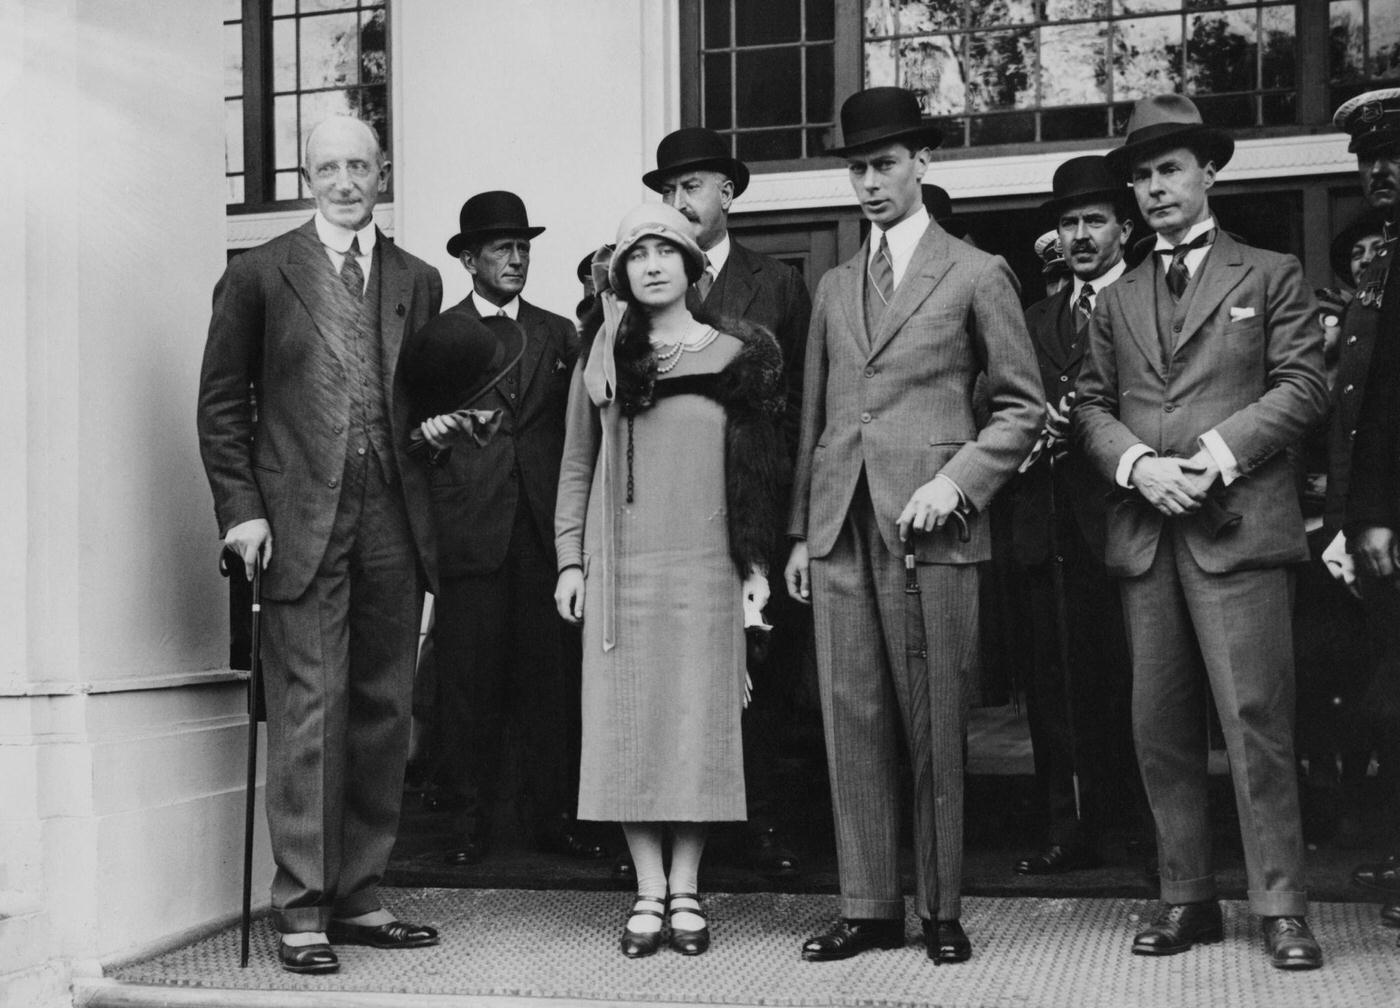 The Duke and Duchess of York on the steps of the Australia building at the British Empire Exhibition, Wembley, London, 29th May 1925.